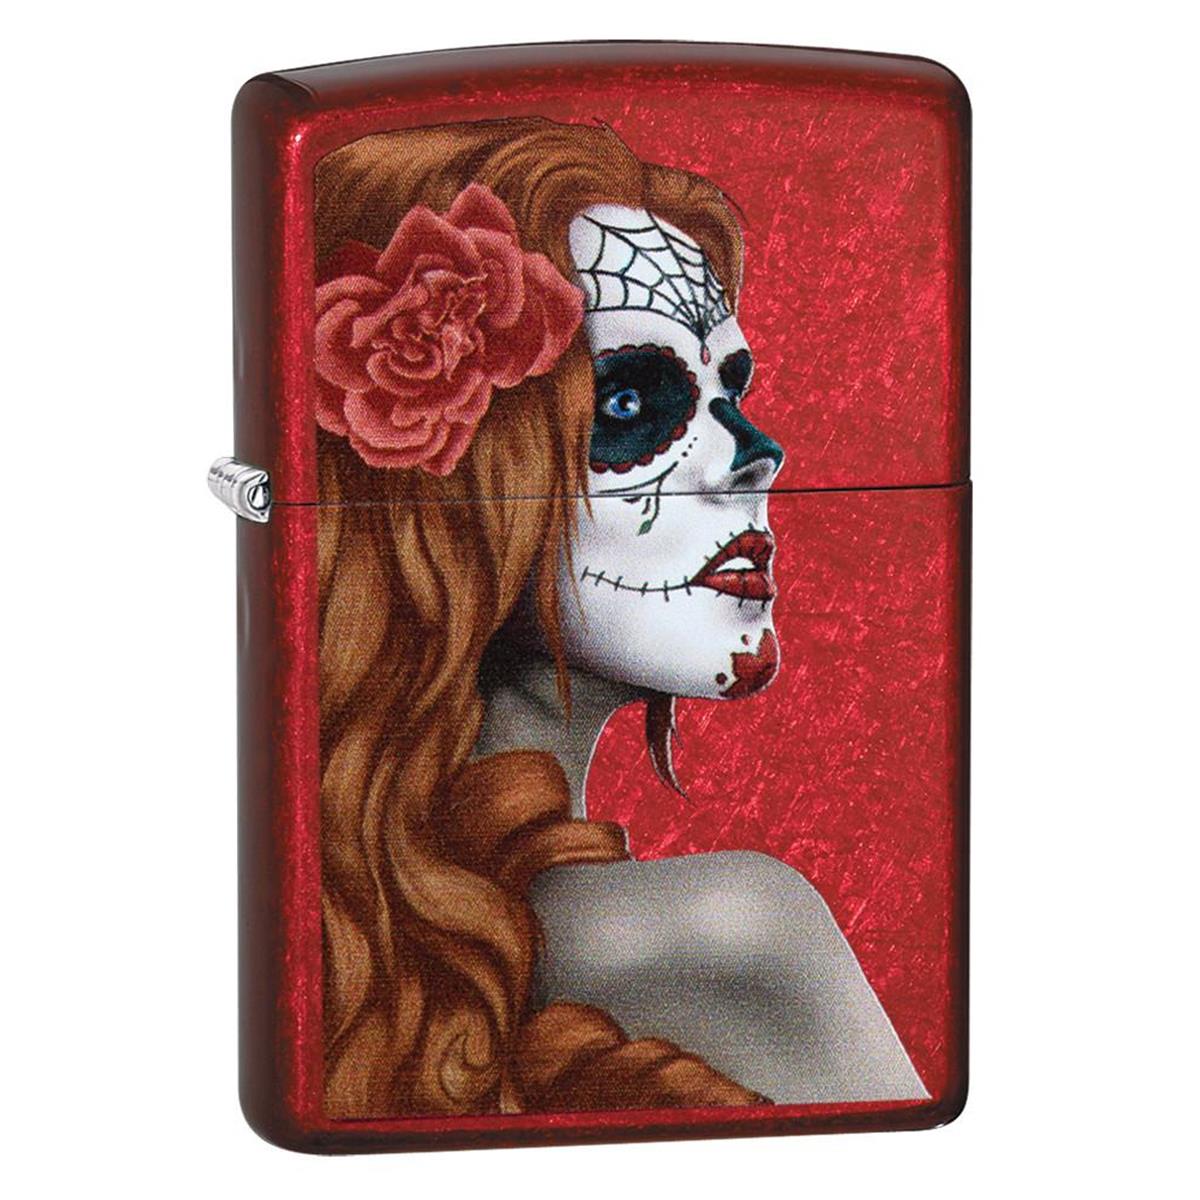 28830 Day Of The Dead Zombie Woman Candy Apple Red Full Size Lighter